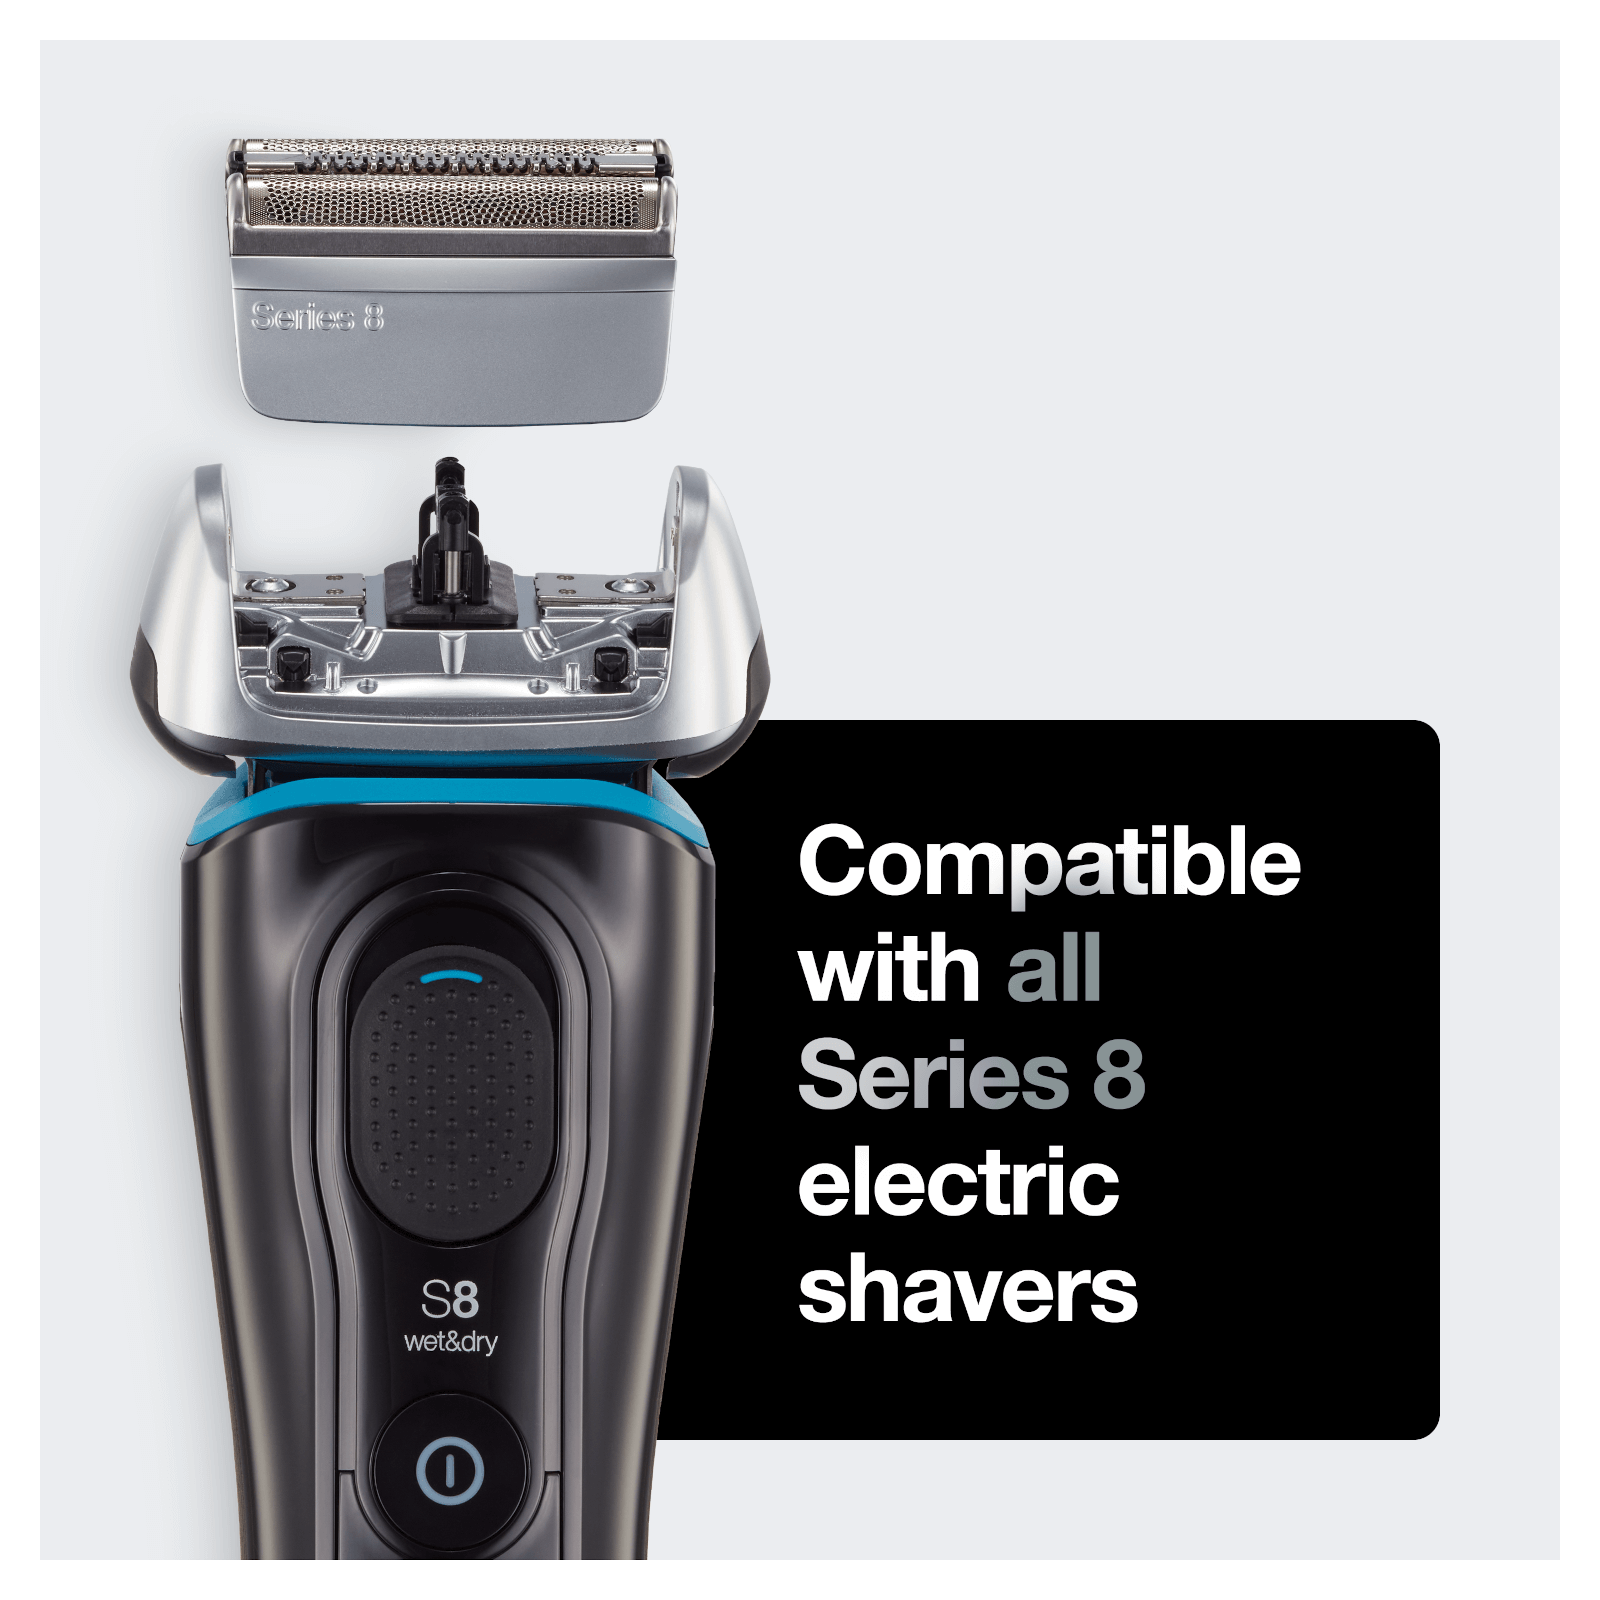  compatible with all series 8 electric shavers